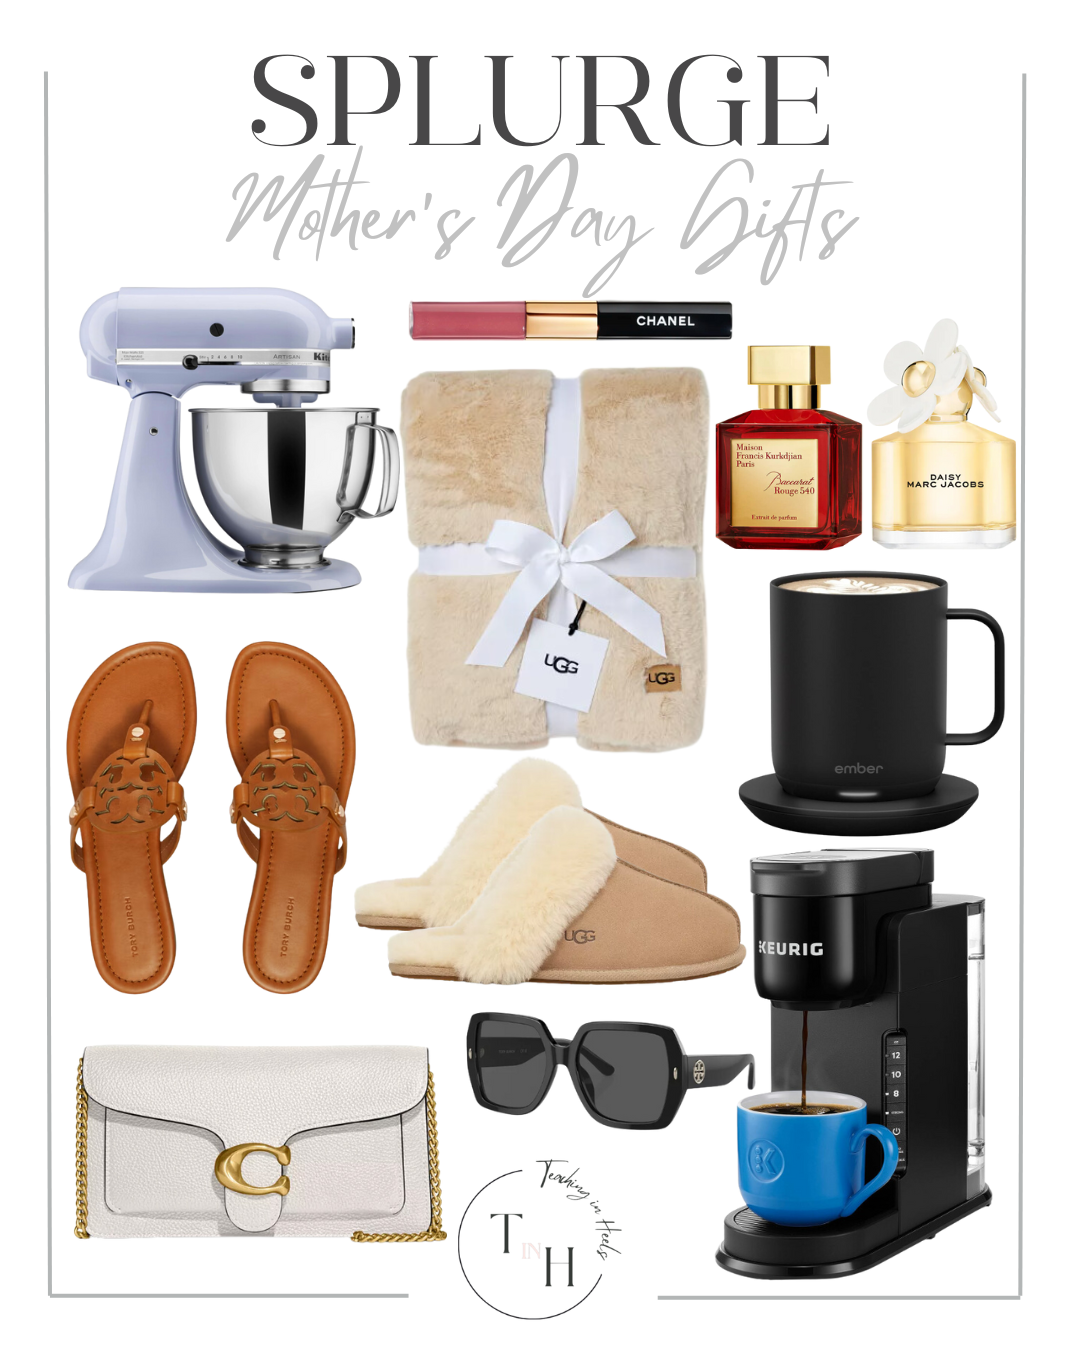 10 Heartwarming Mother's Day Gift Ideas to Show Your Love

mother's day, mother's gifts, mom gifts, gift guide, handbag, sandals, coffee maker